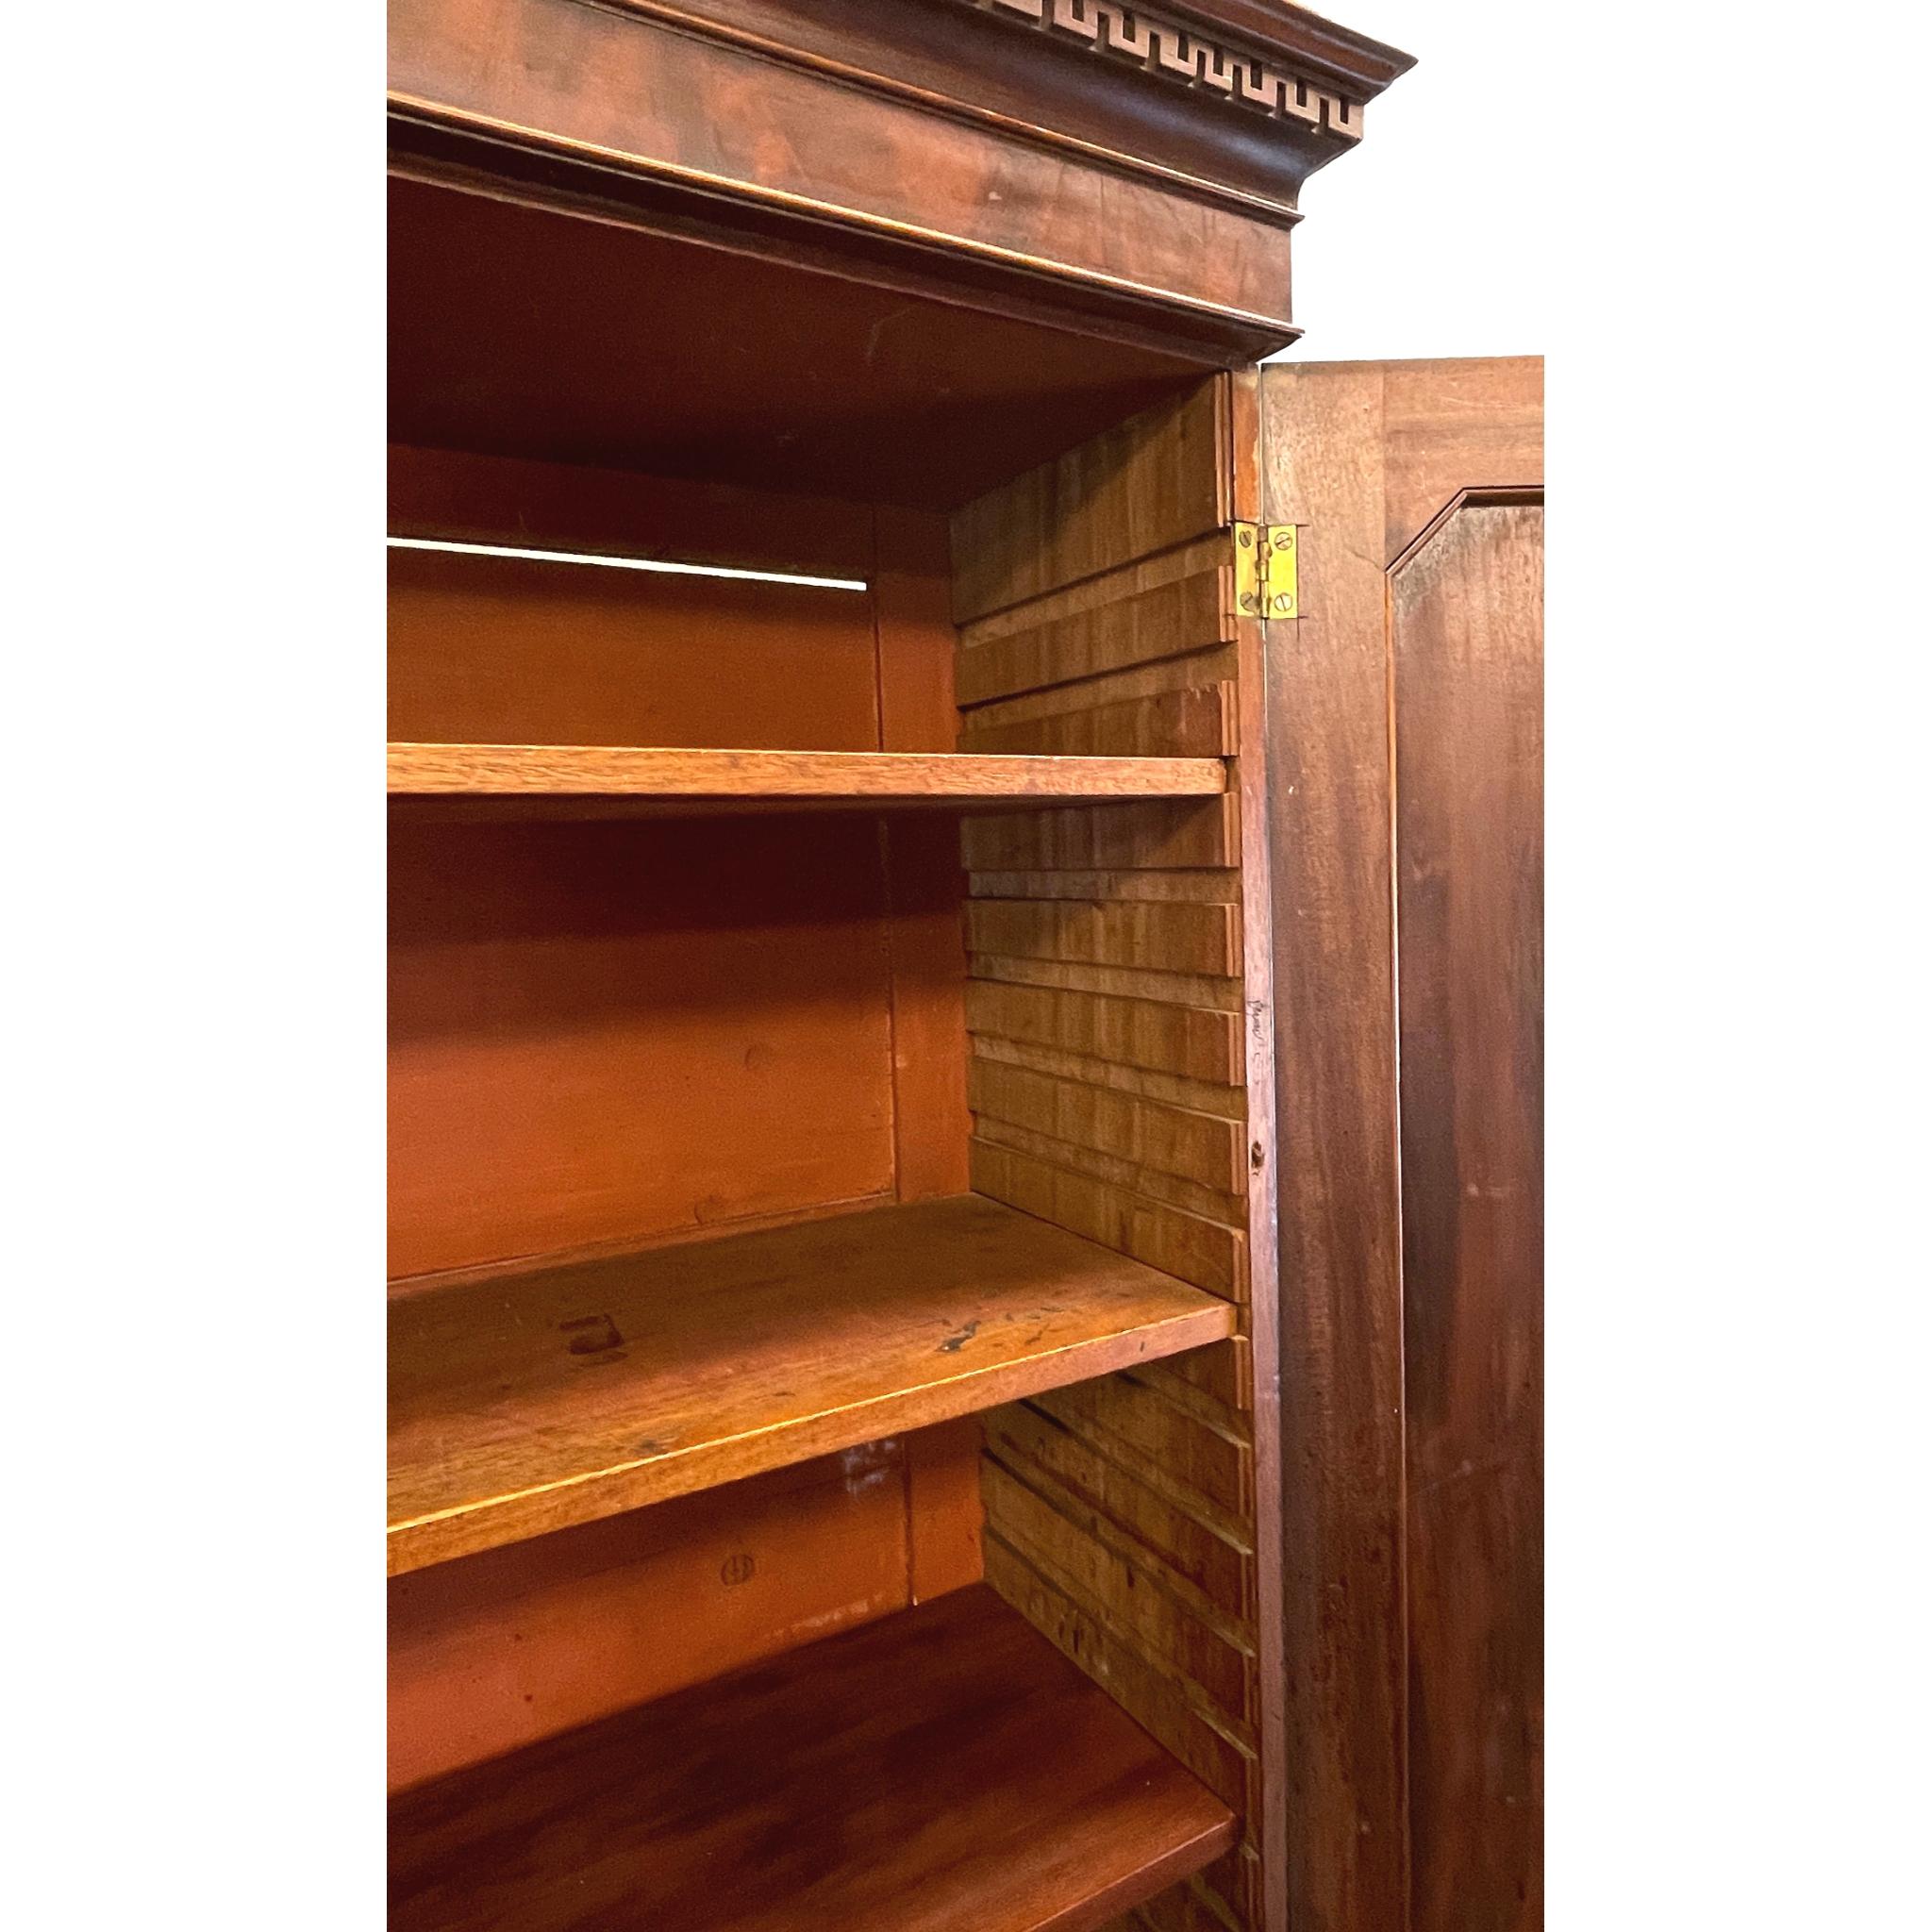 An extremely good quality mid-18th century Georgian mahogany
Chippendale period library bookcase, or cabinet, having Greek
Key moulded cornice over superbly figured panelled cupboard
Doors enclosing three adjustable shelves over secretaire